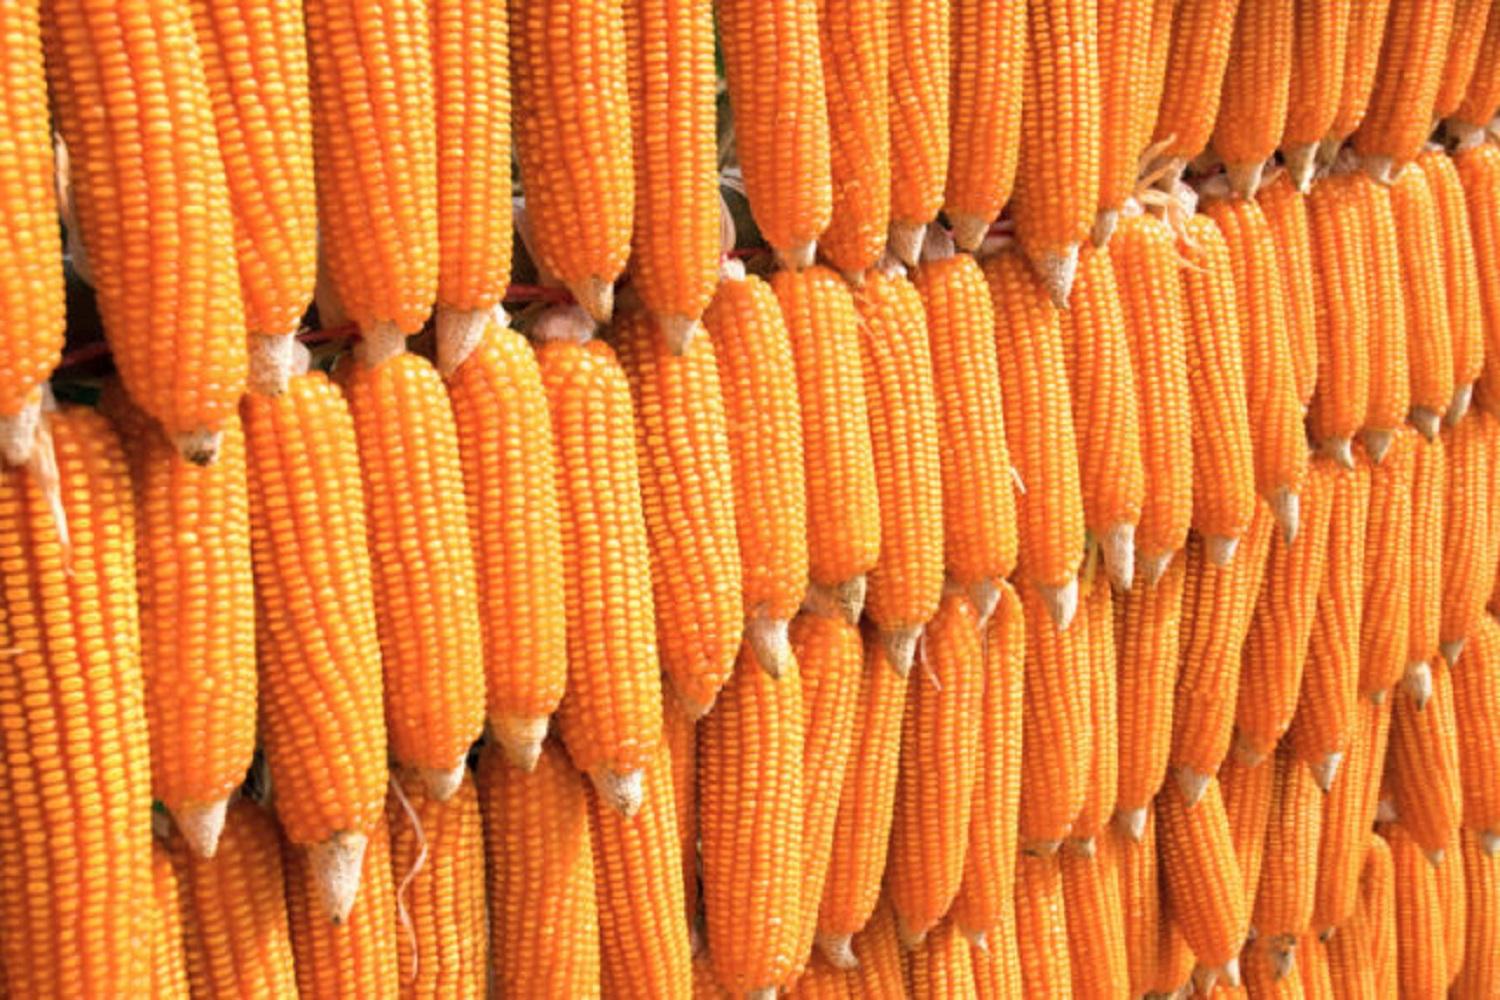 LASG partners with maize farmers on production - Vanguard News